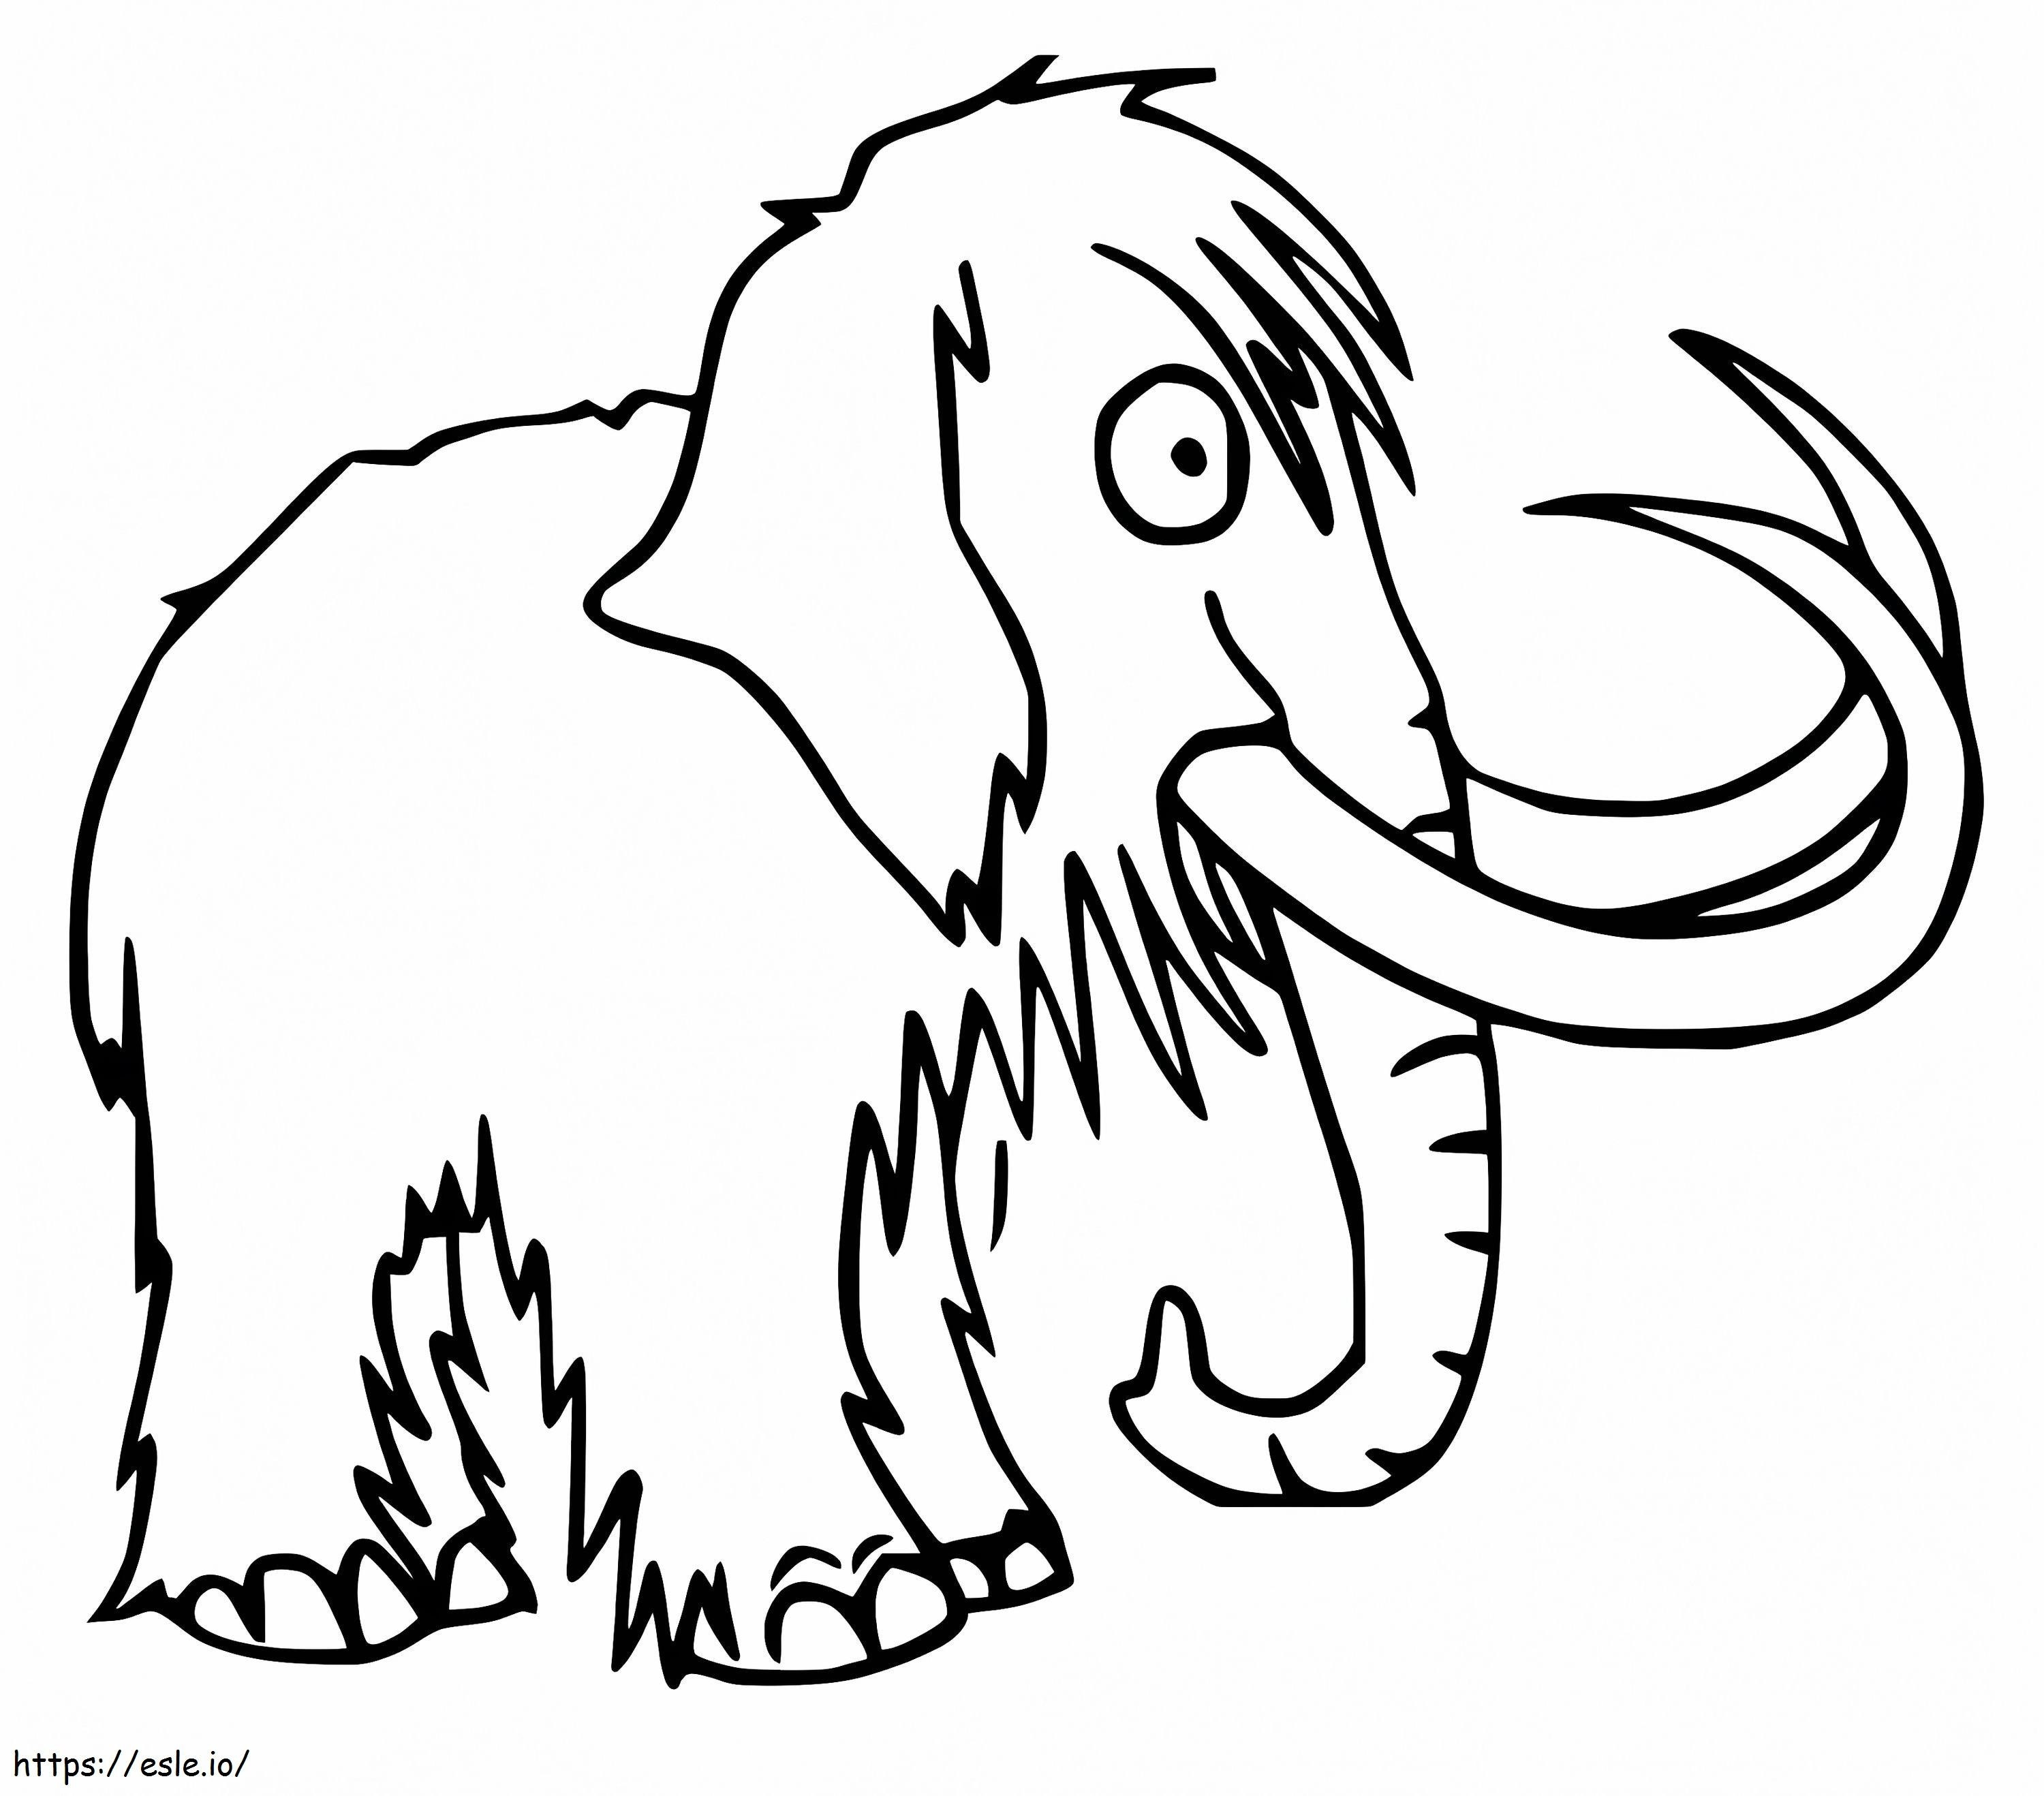 Free Printable Mammoth coloring page